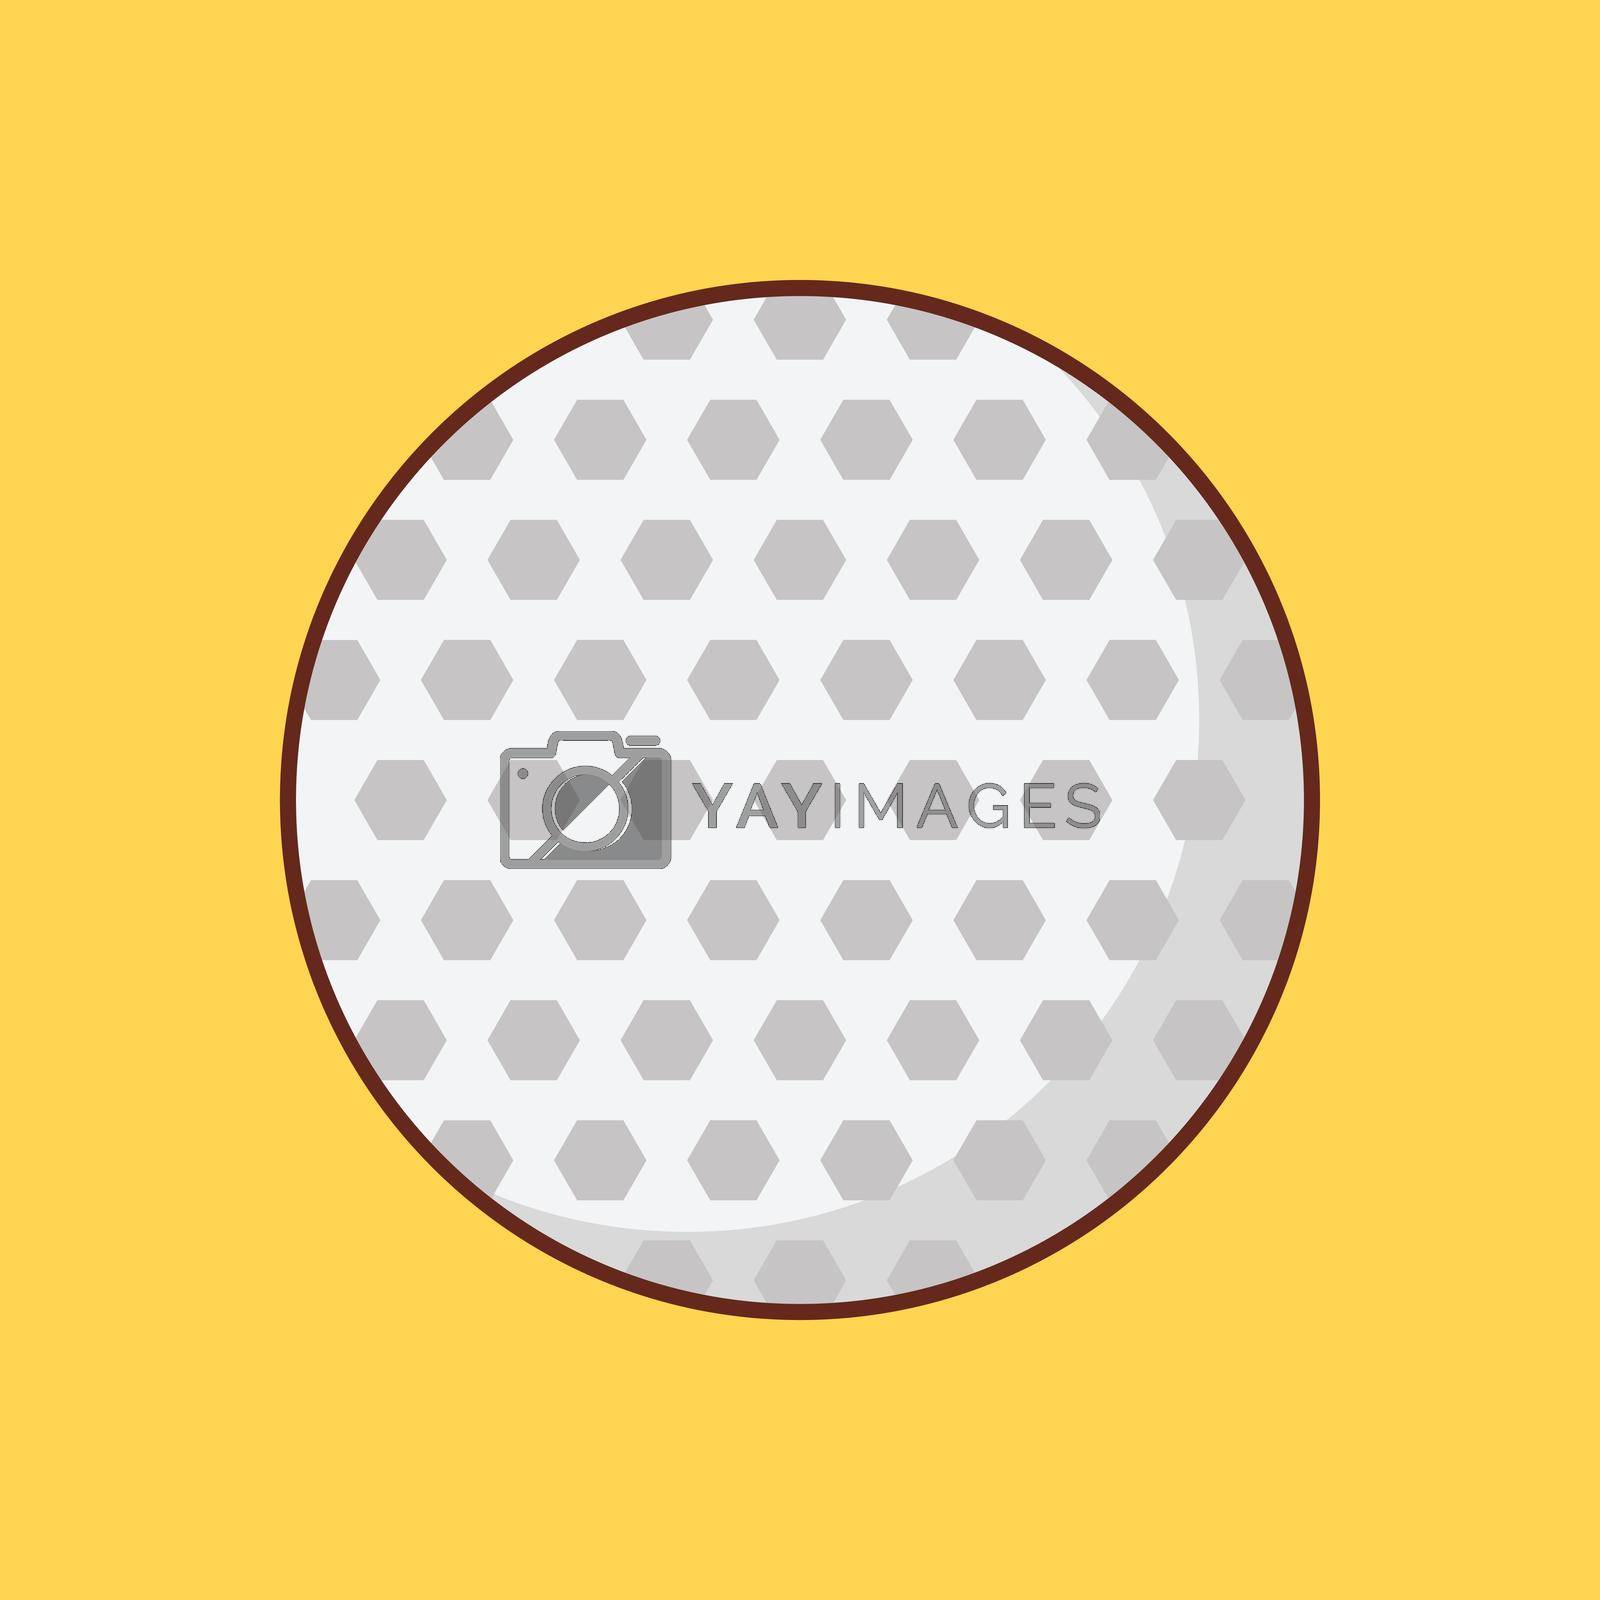 Royalty free image of golf by vectorstall